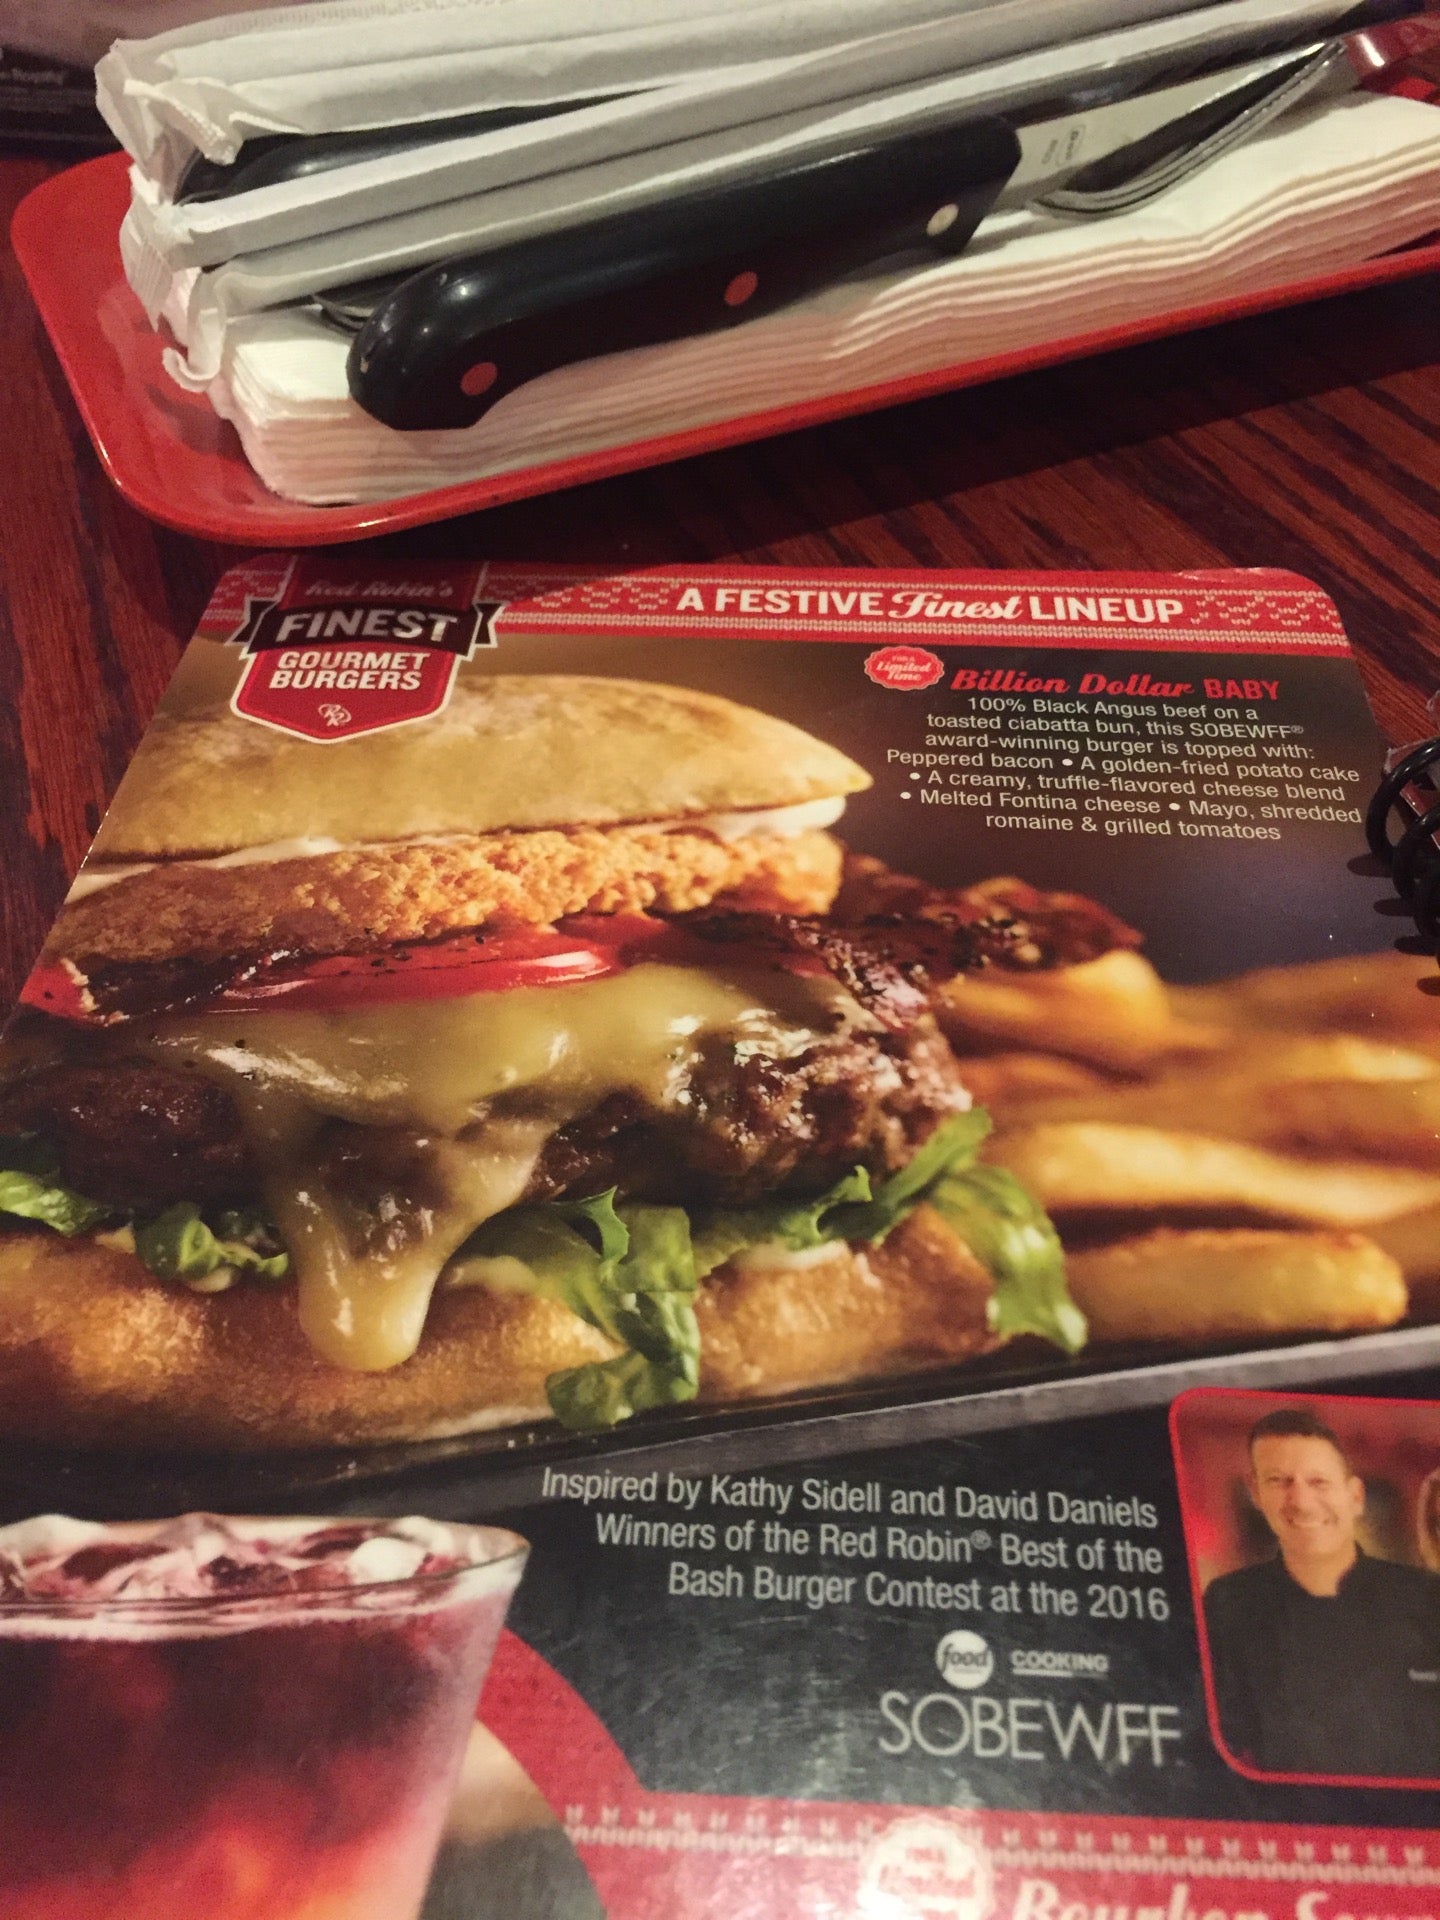 Red Robin Gourmet Burgers - Looks like we found out who's been